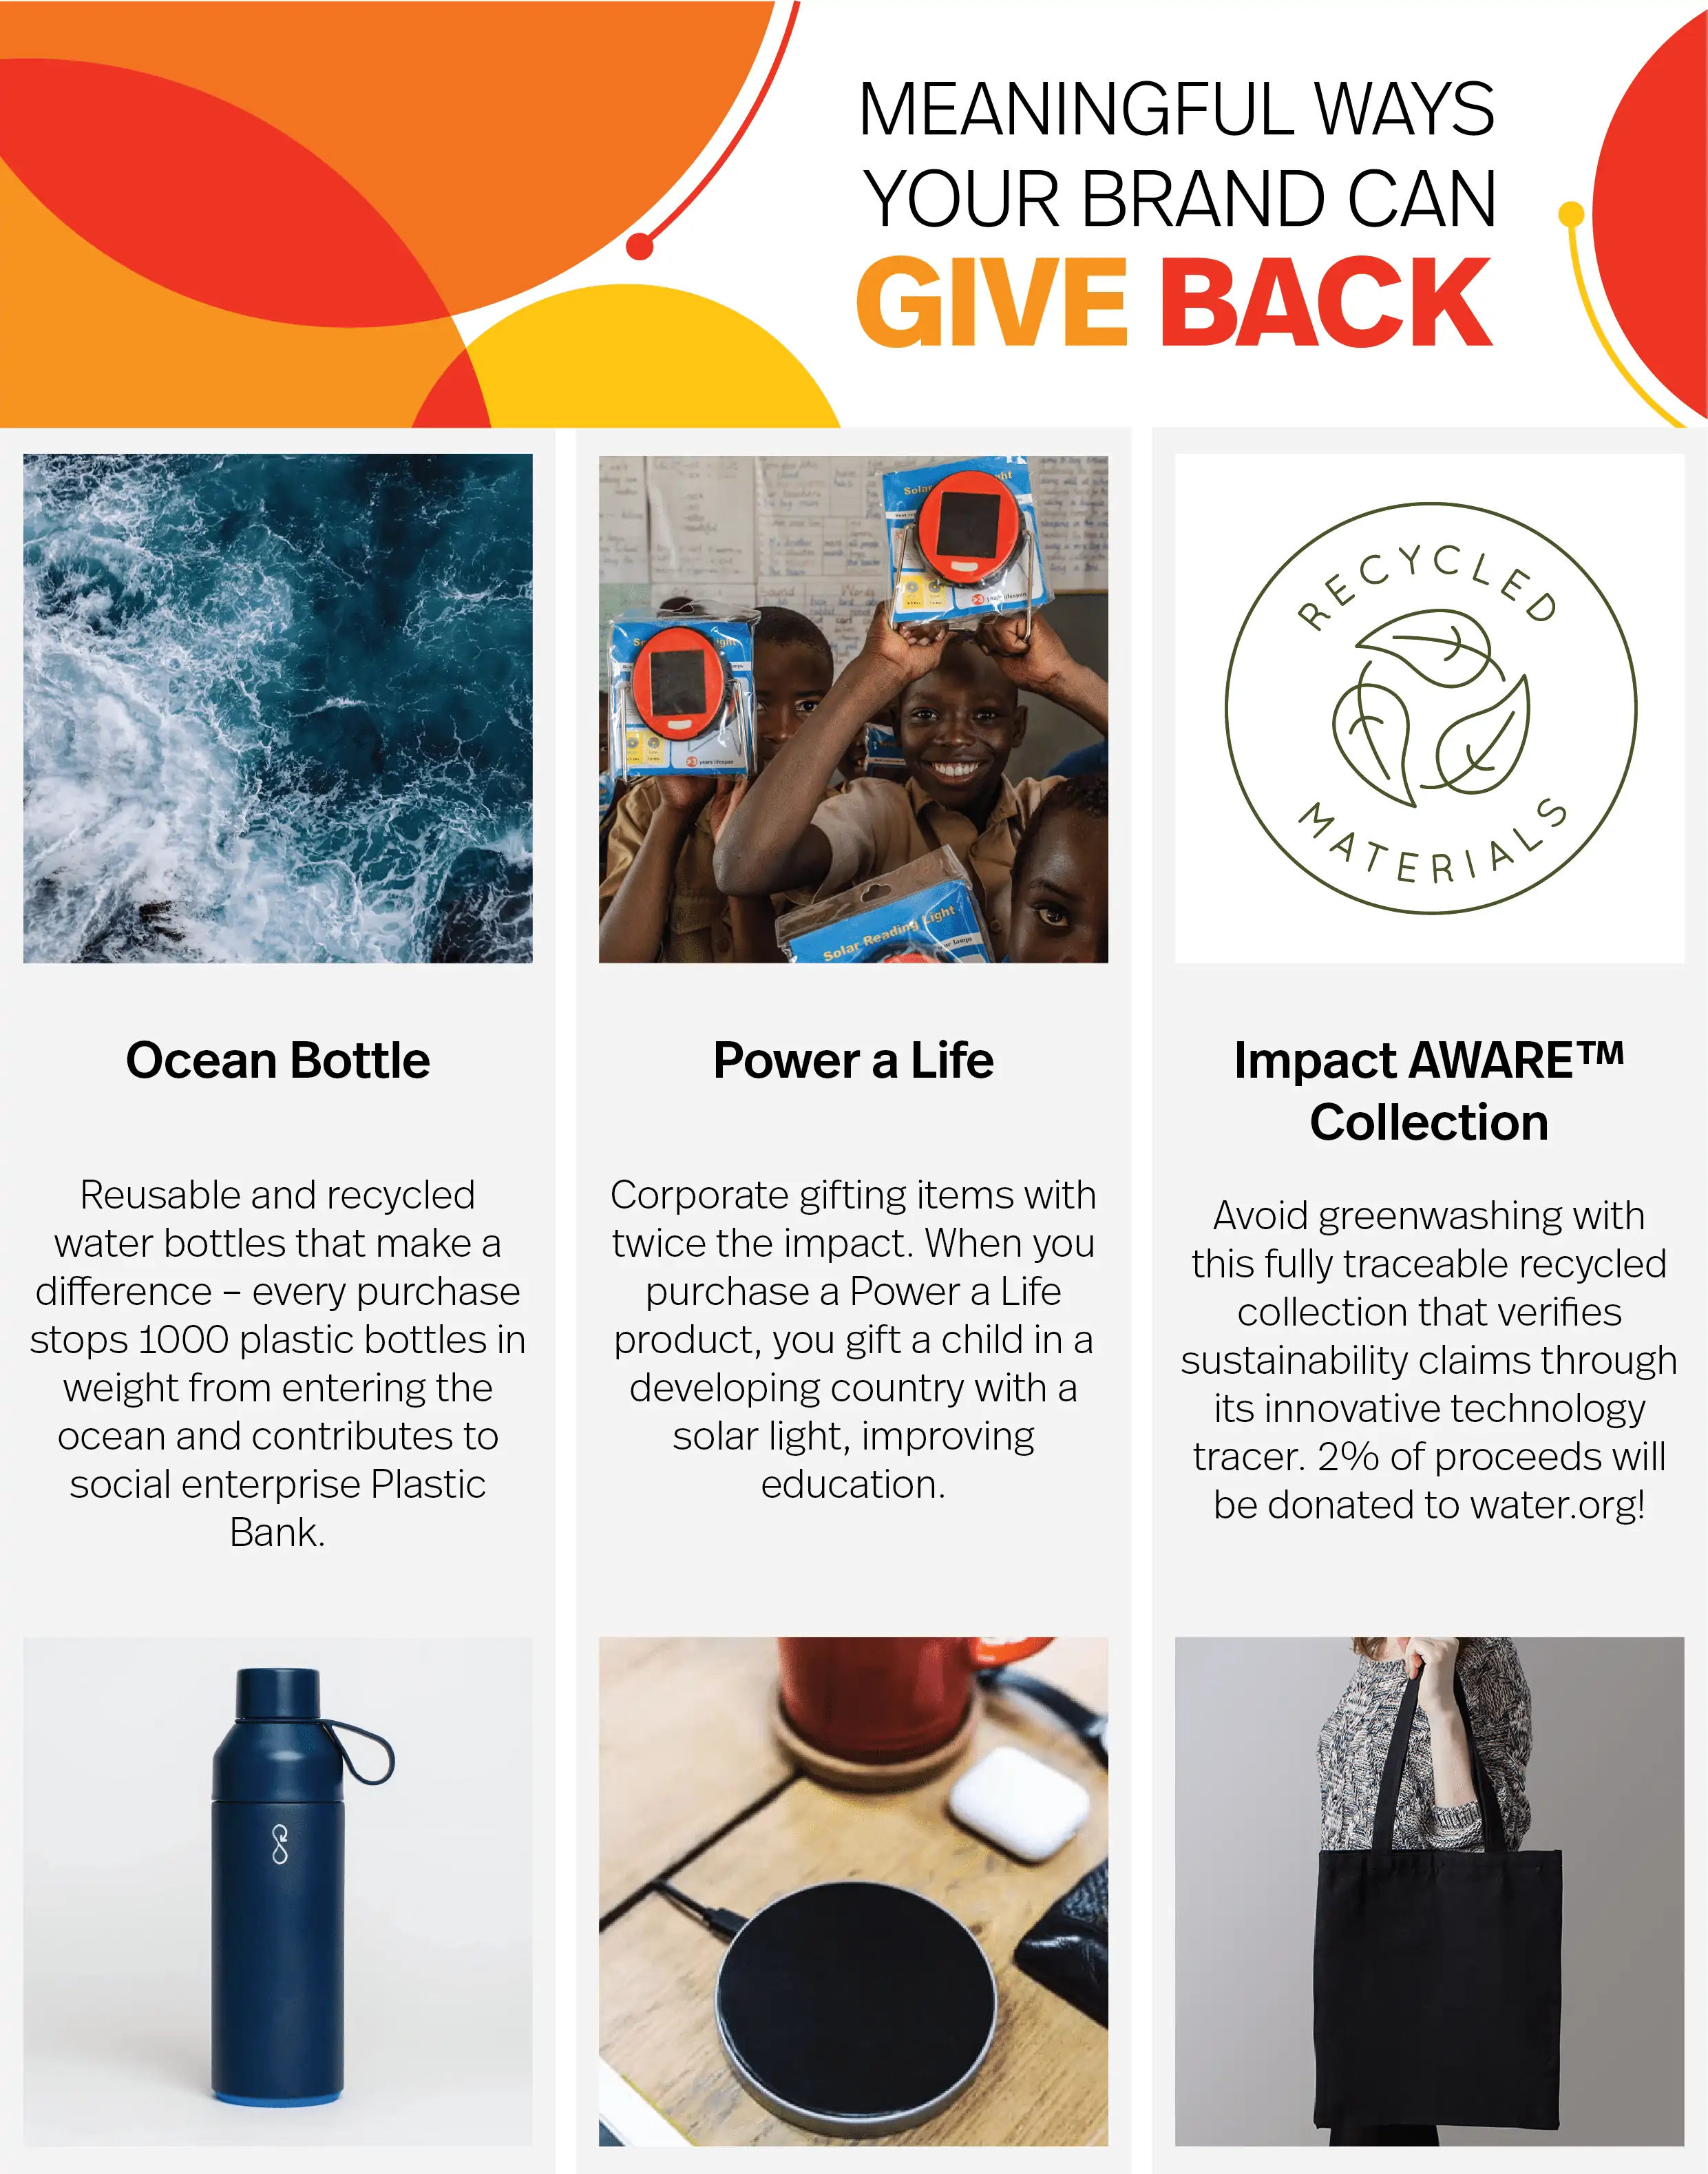 Poster showing meaningful brands that give back. Includes Ocean Bottle, Power a Life charger and Impact AWARE Collection (recycled tote)